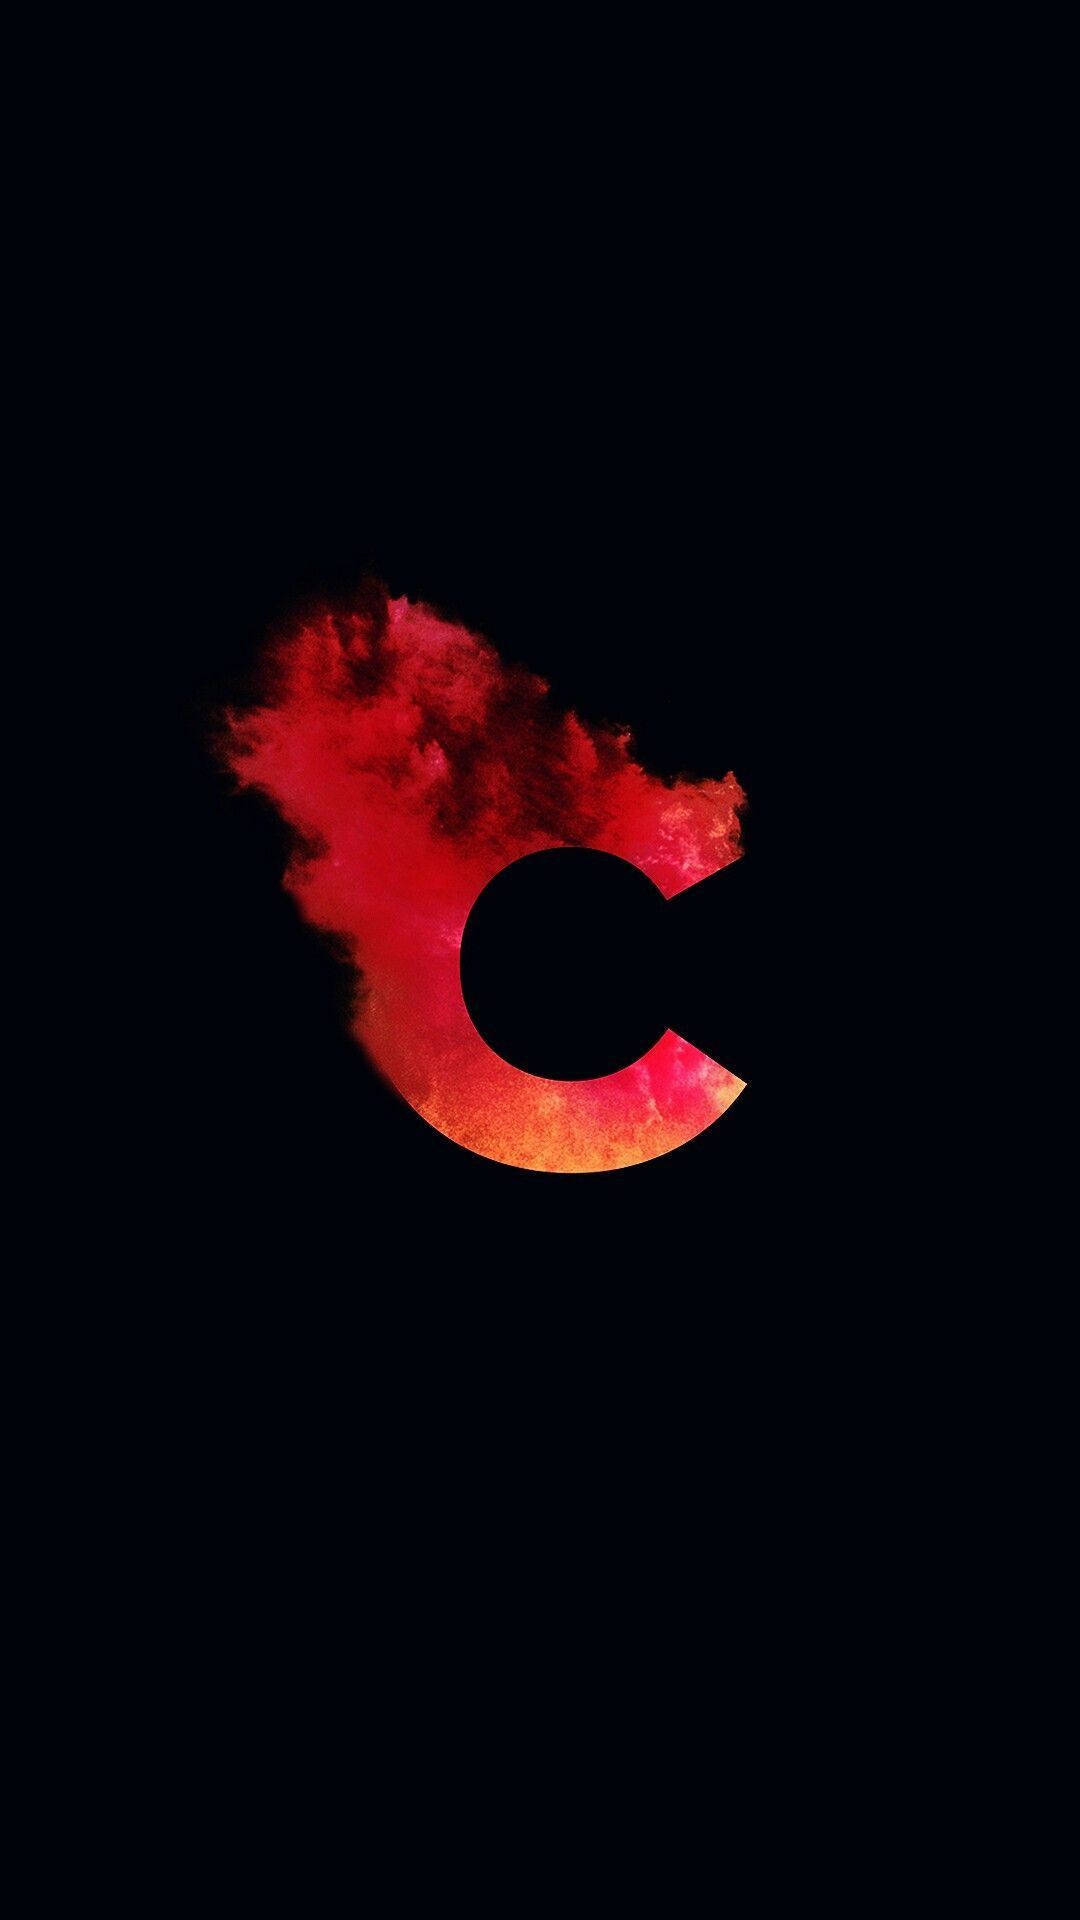 Download Fiery Letter C On A Dark Background Wallpaper | Wallpapers.Com